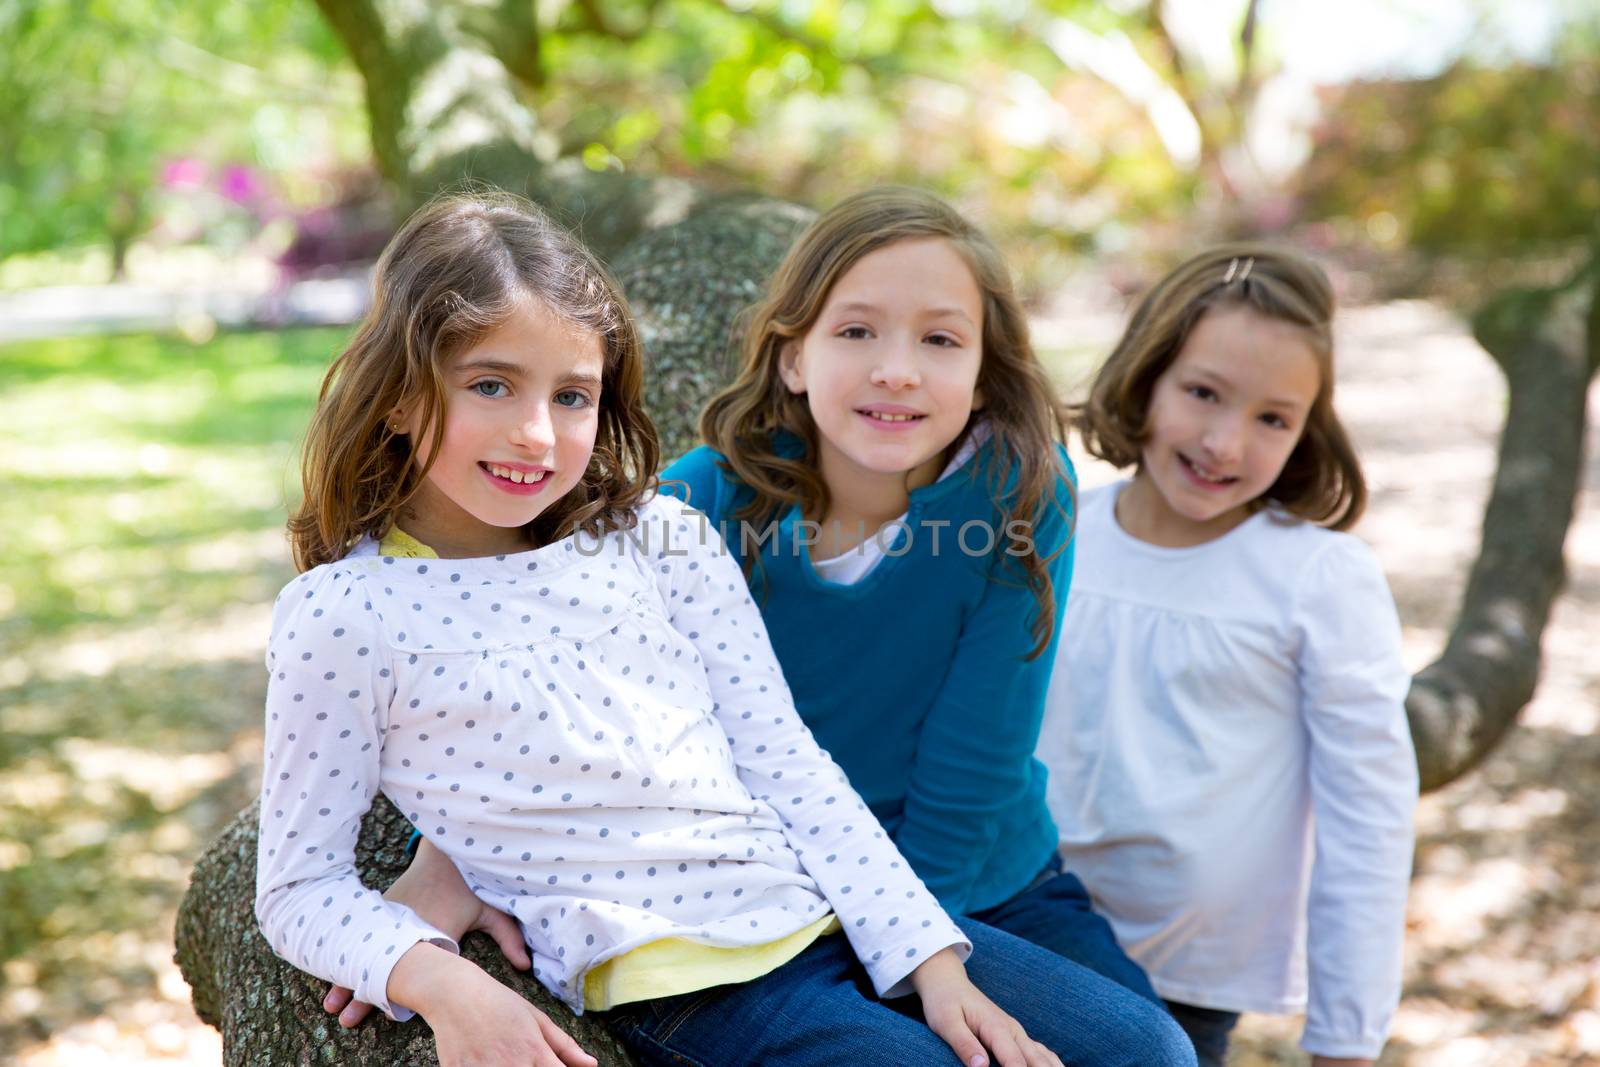 friends sister girls resting on tree trunk nature outdoor